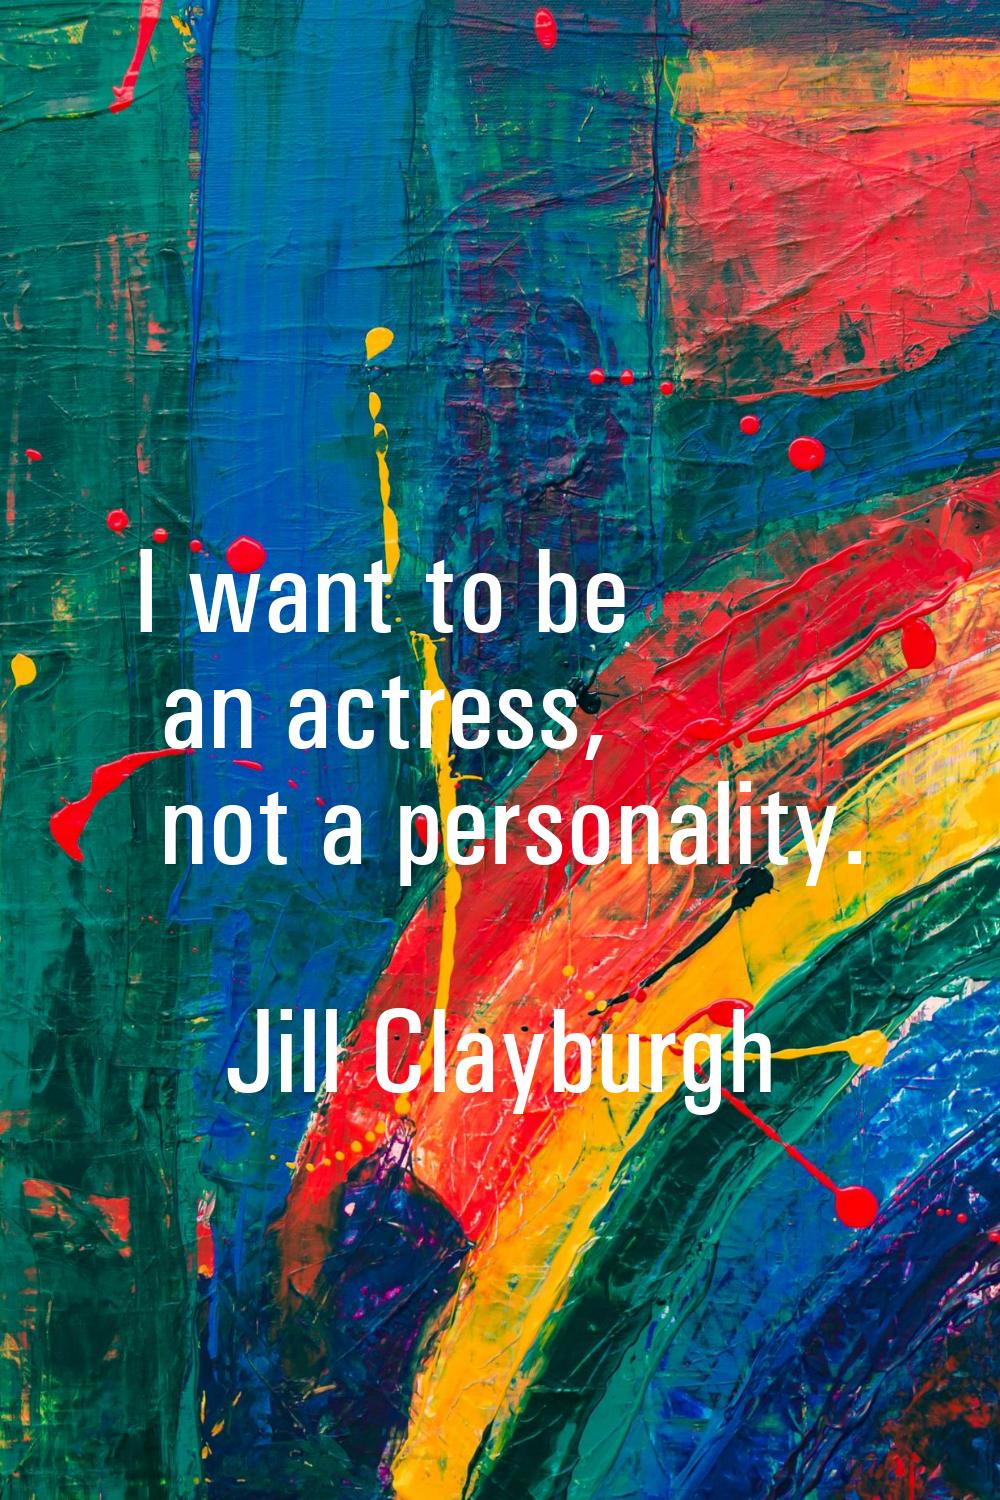 I want to be an actress, not a personality.